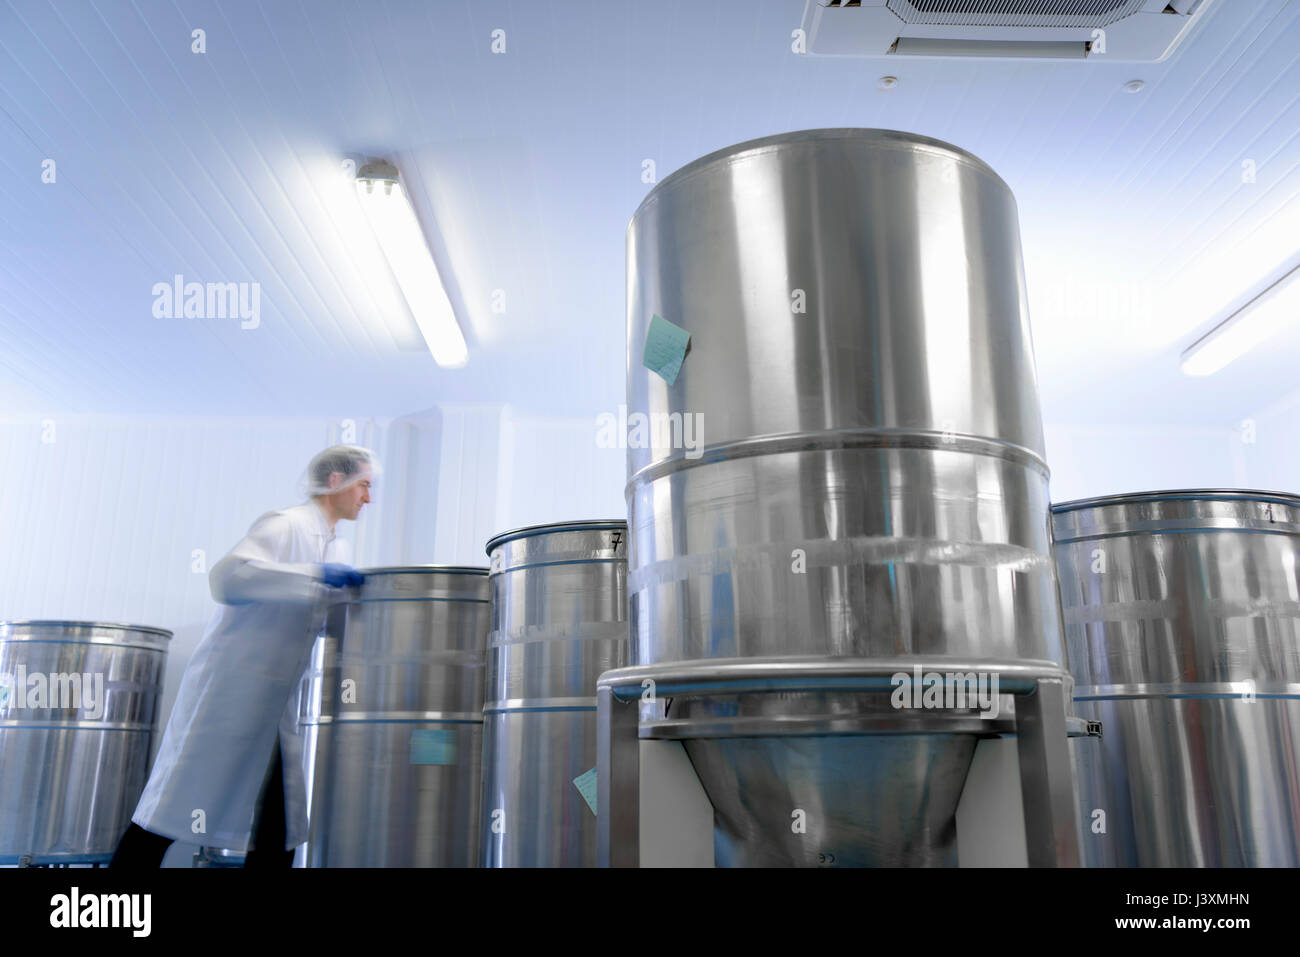 Worker moving vat in pharmaceutical factory Stock Photo